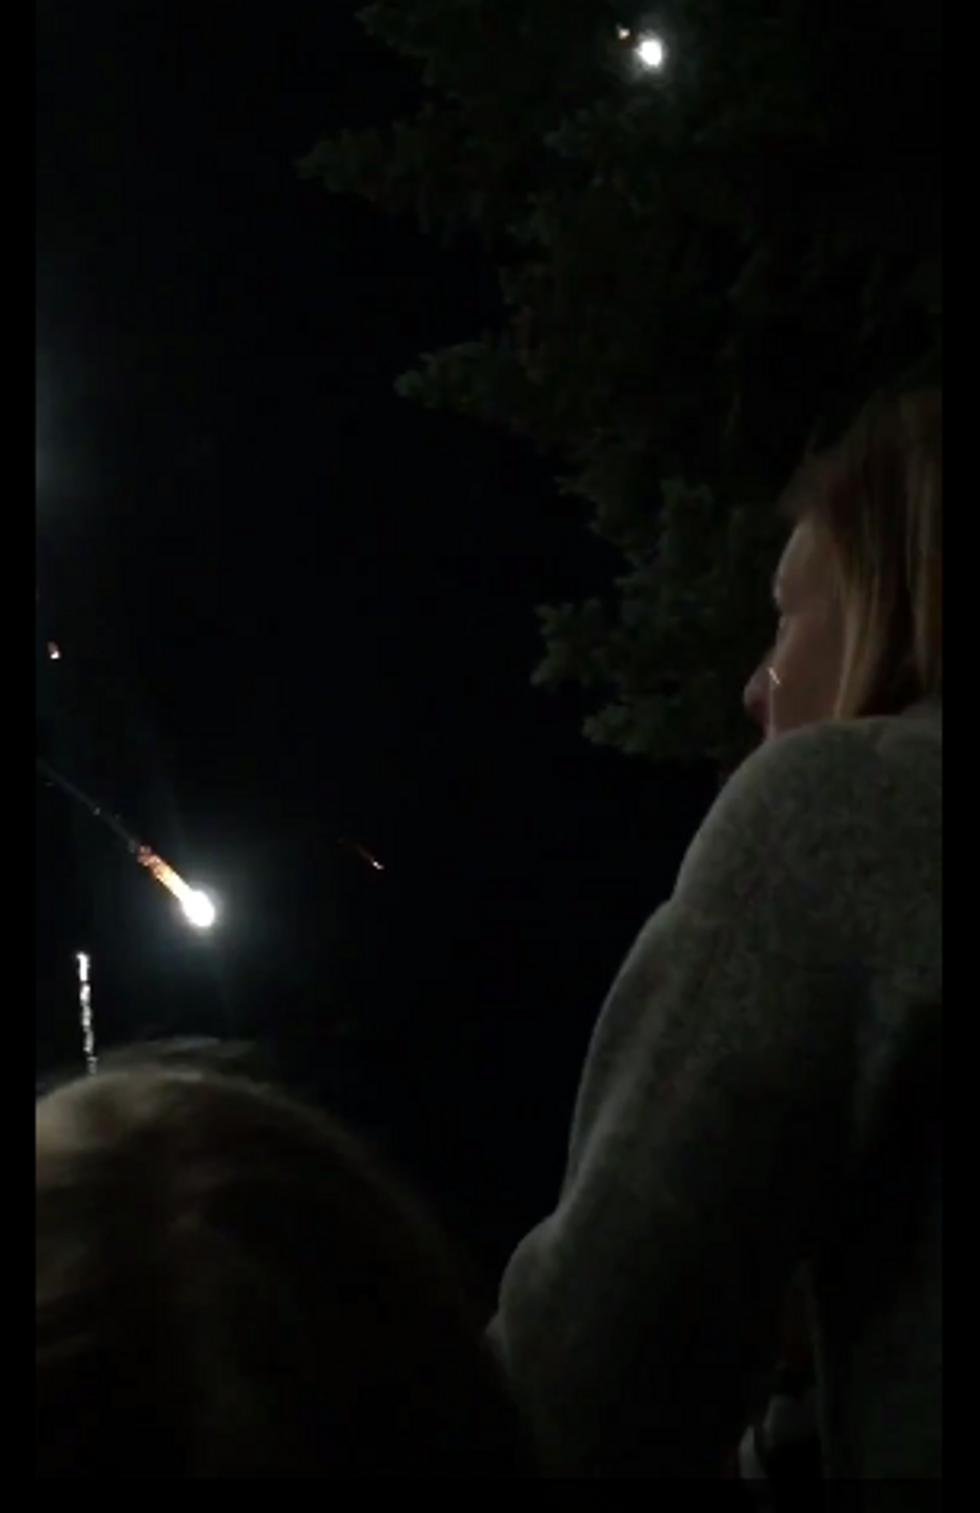 I'm Getting Out of Here!" Video Captures Firework Mishap That Injured 9 in Colorado